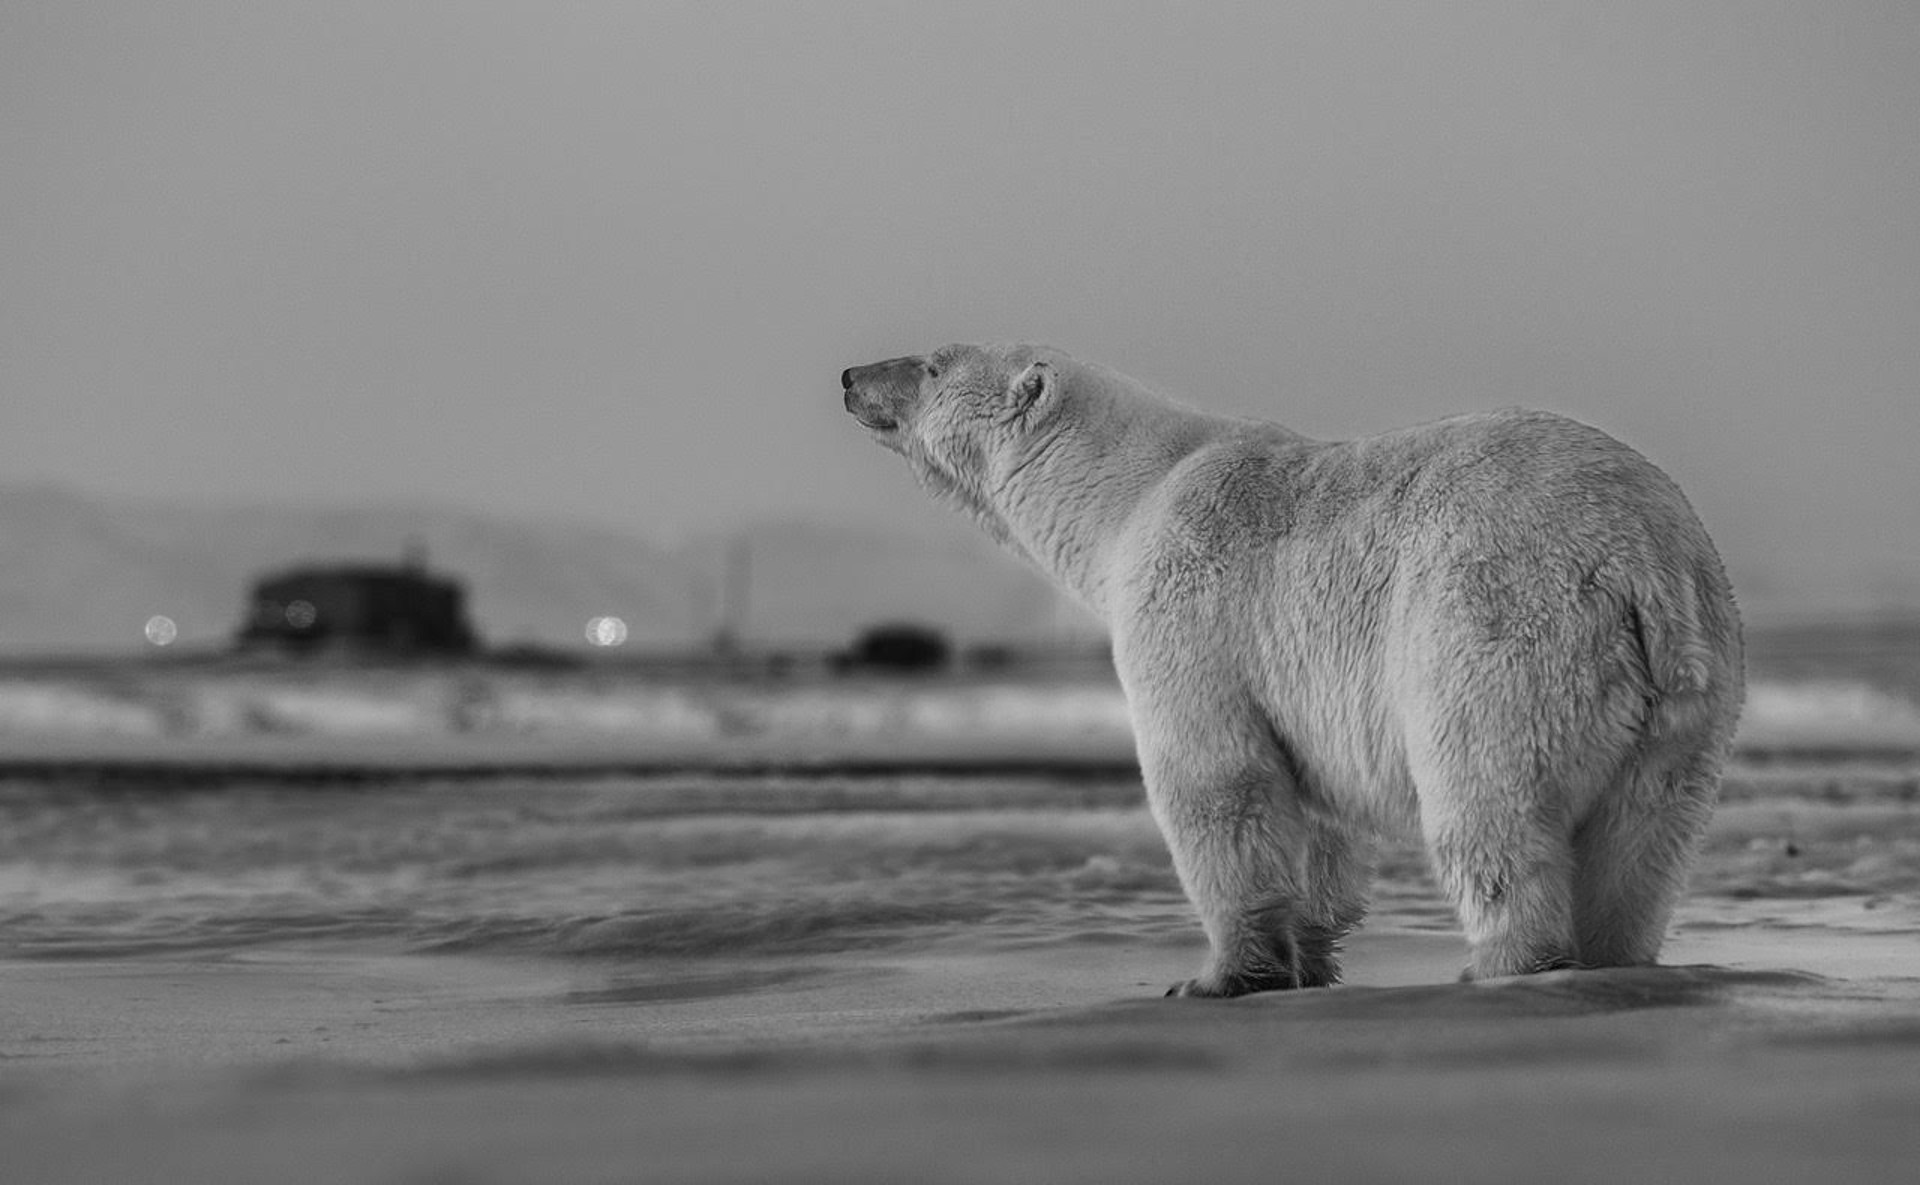 My Place or Yours by David Yarrow